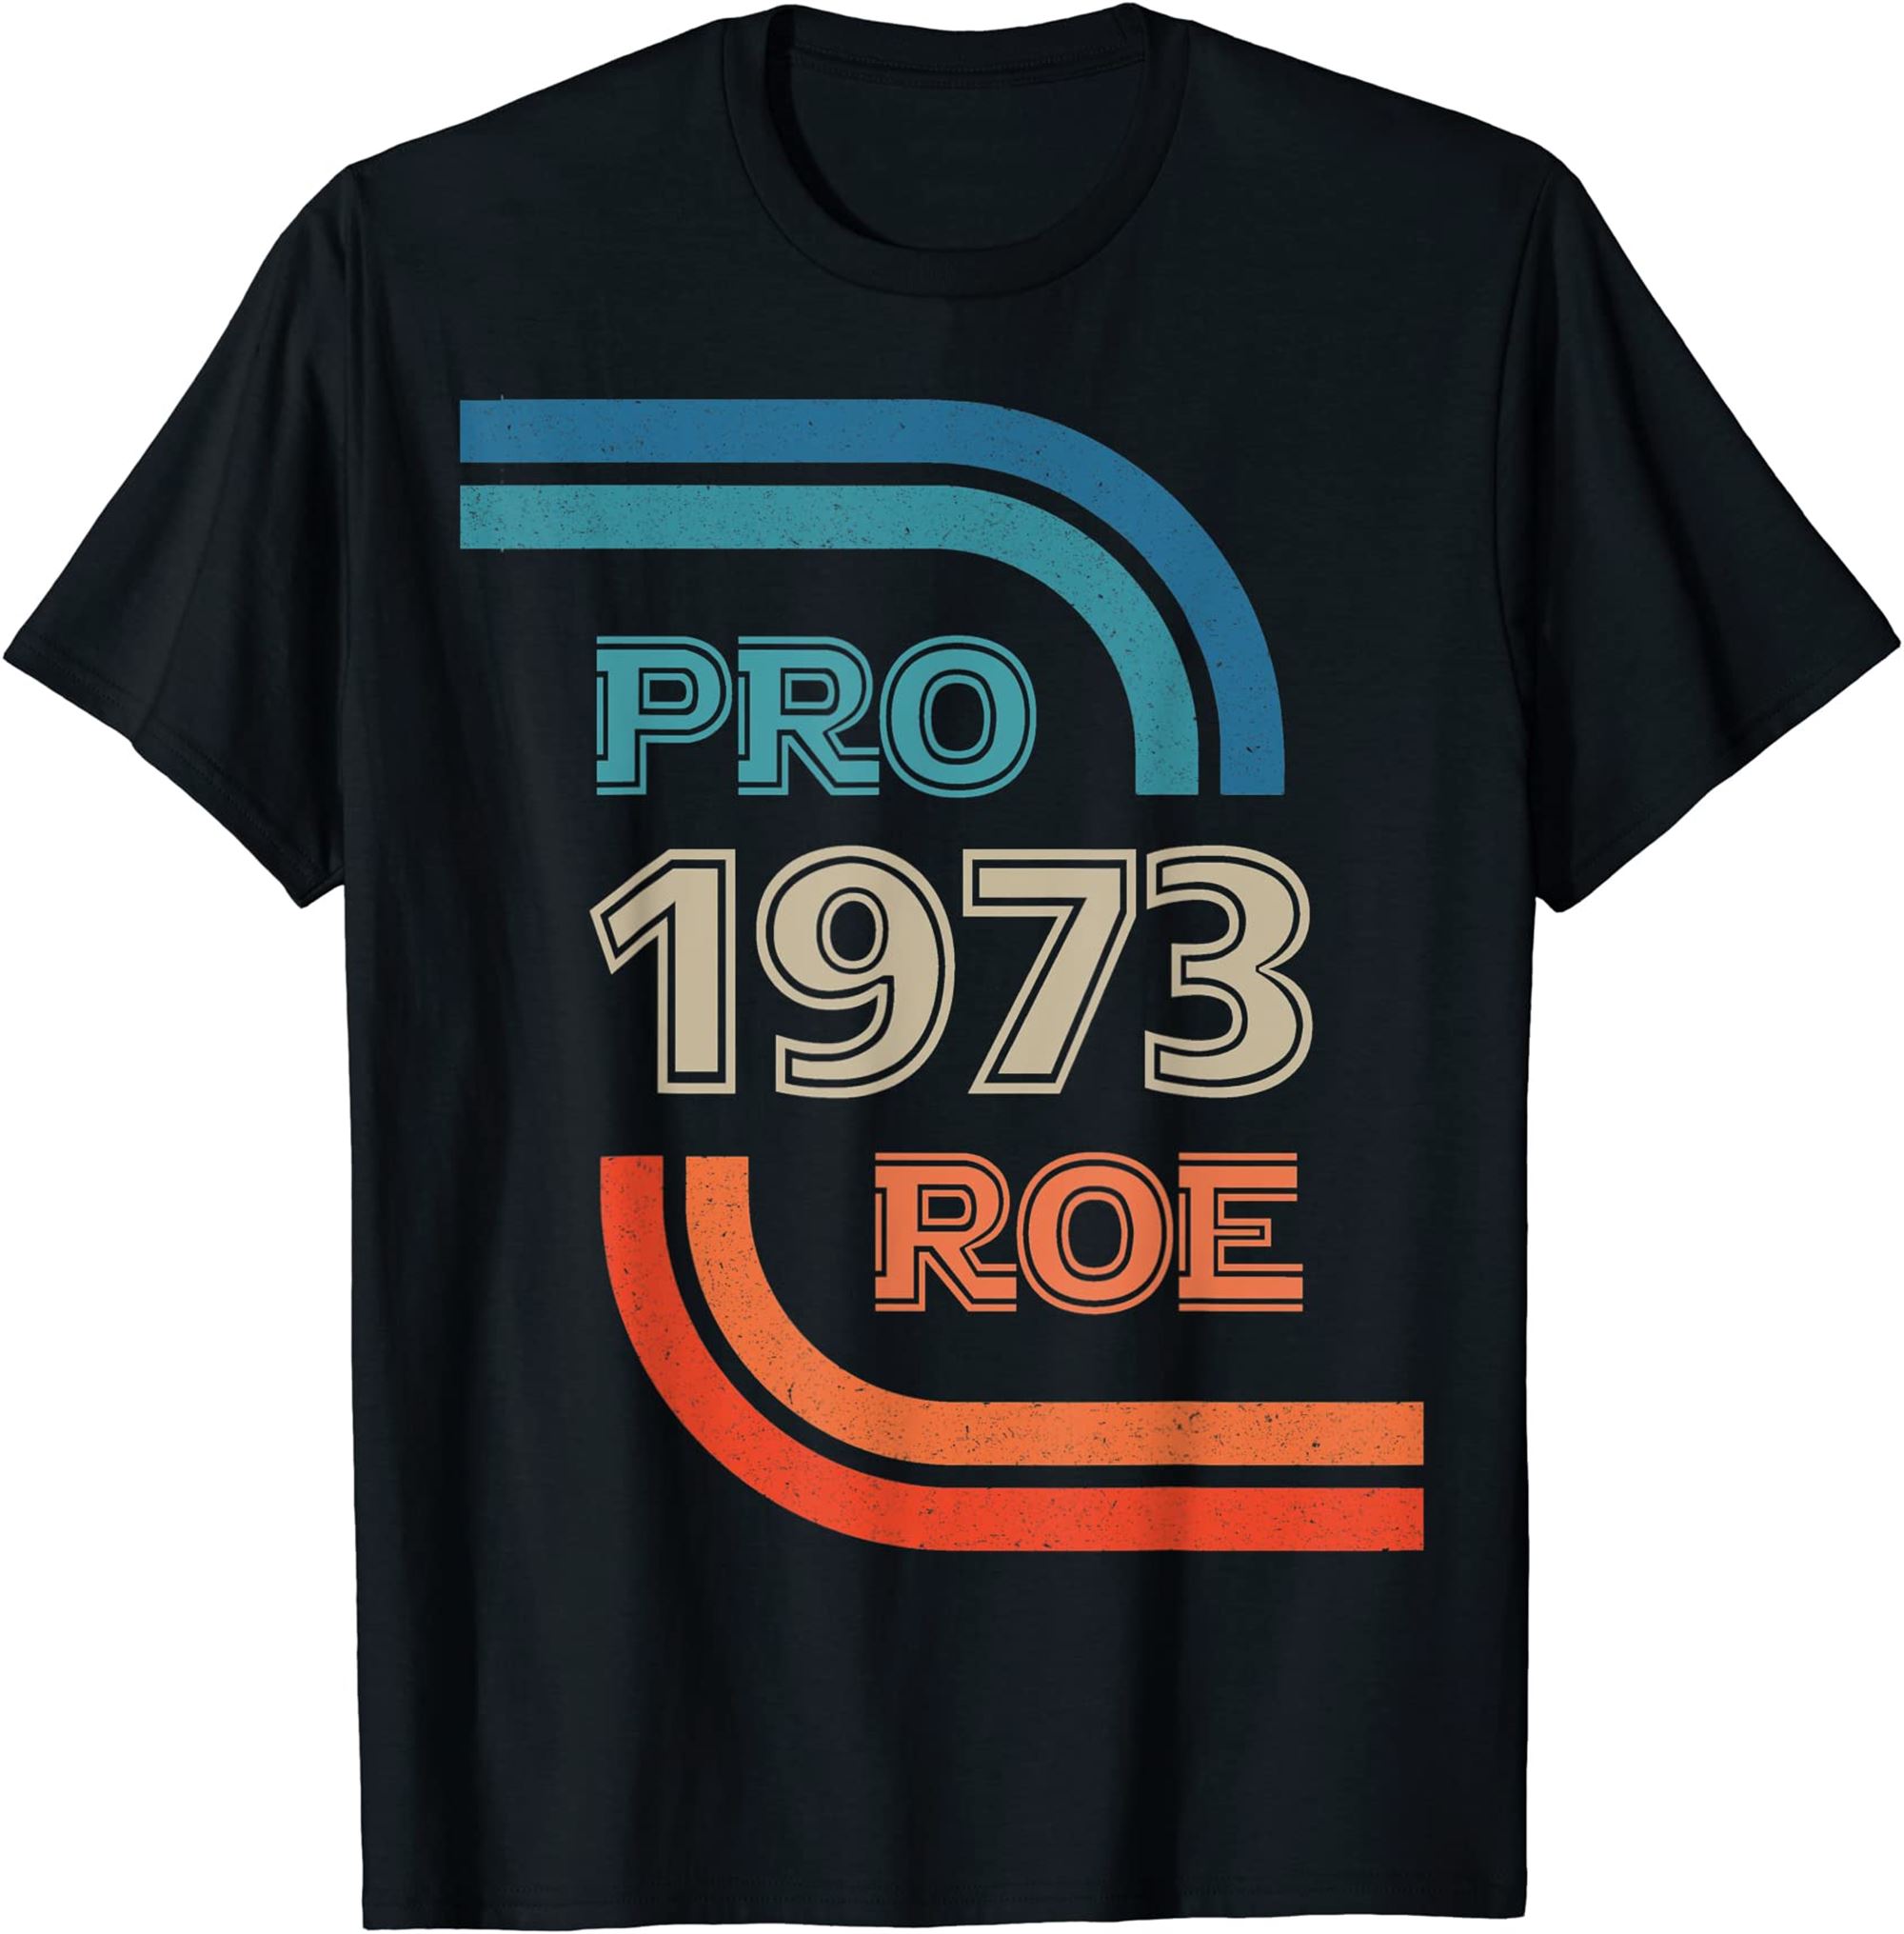 Pro Roe 1973 Roe V Wade T-shirt Full Size Up To 5xl